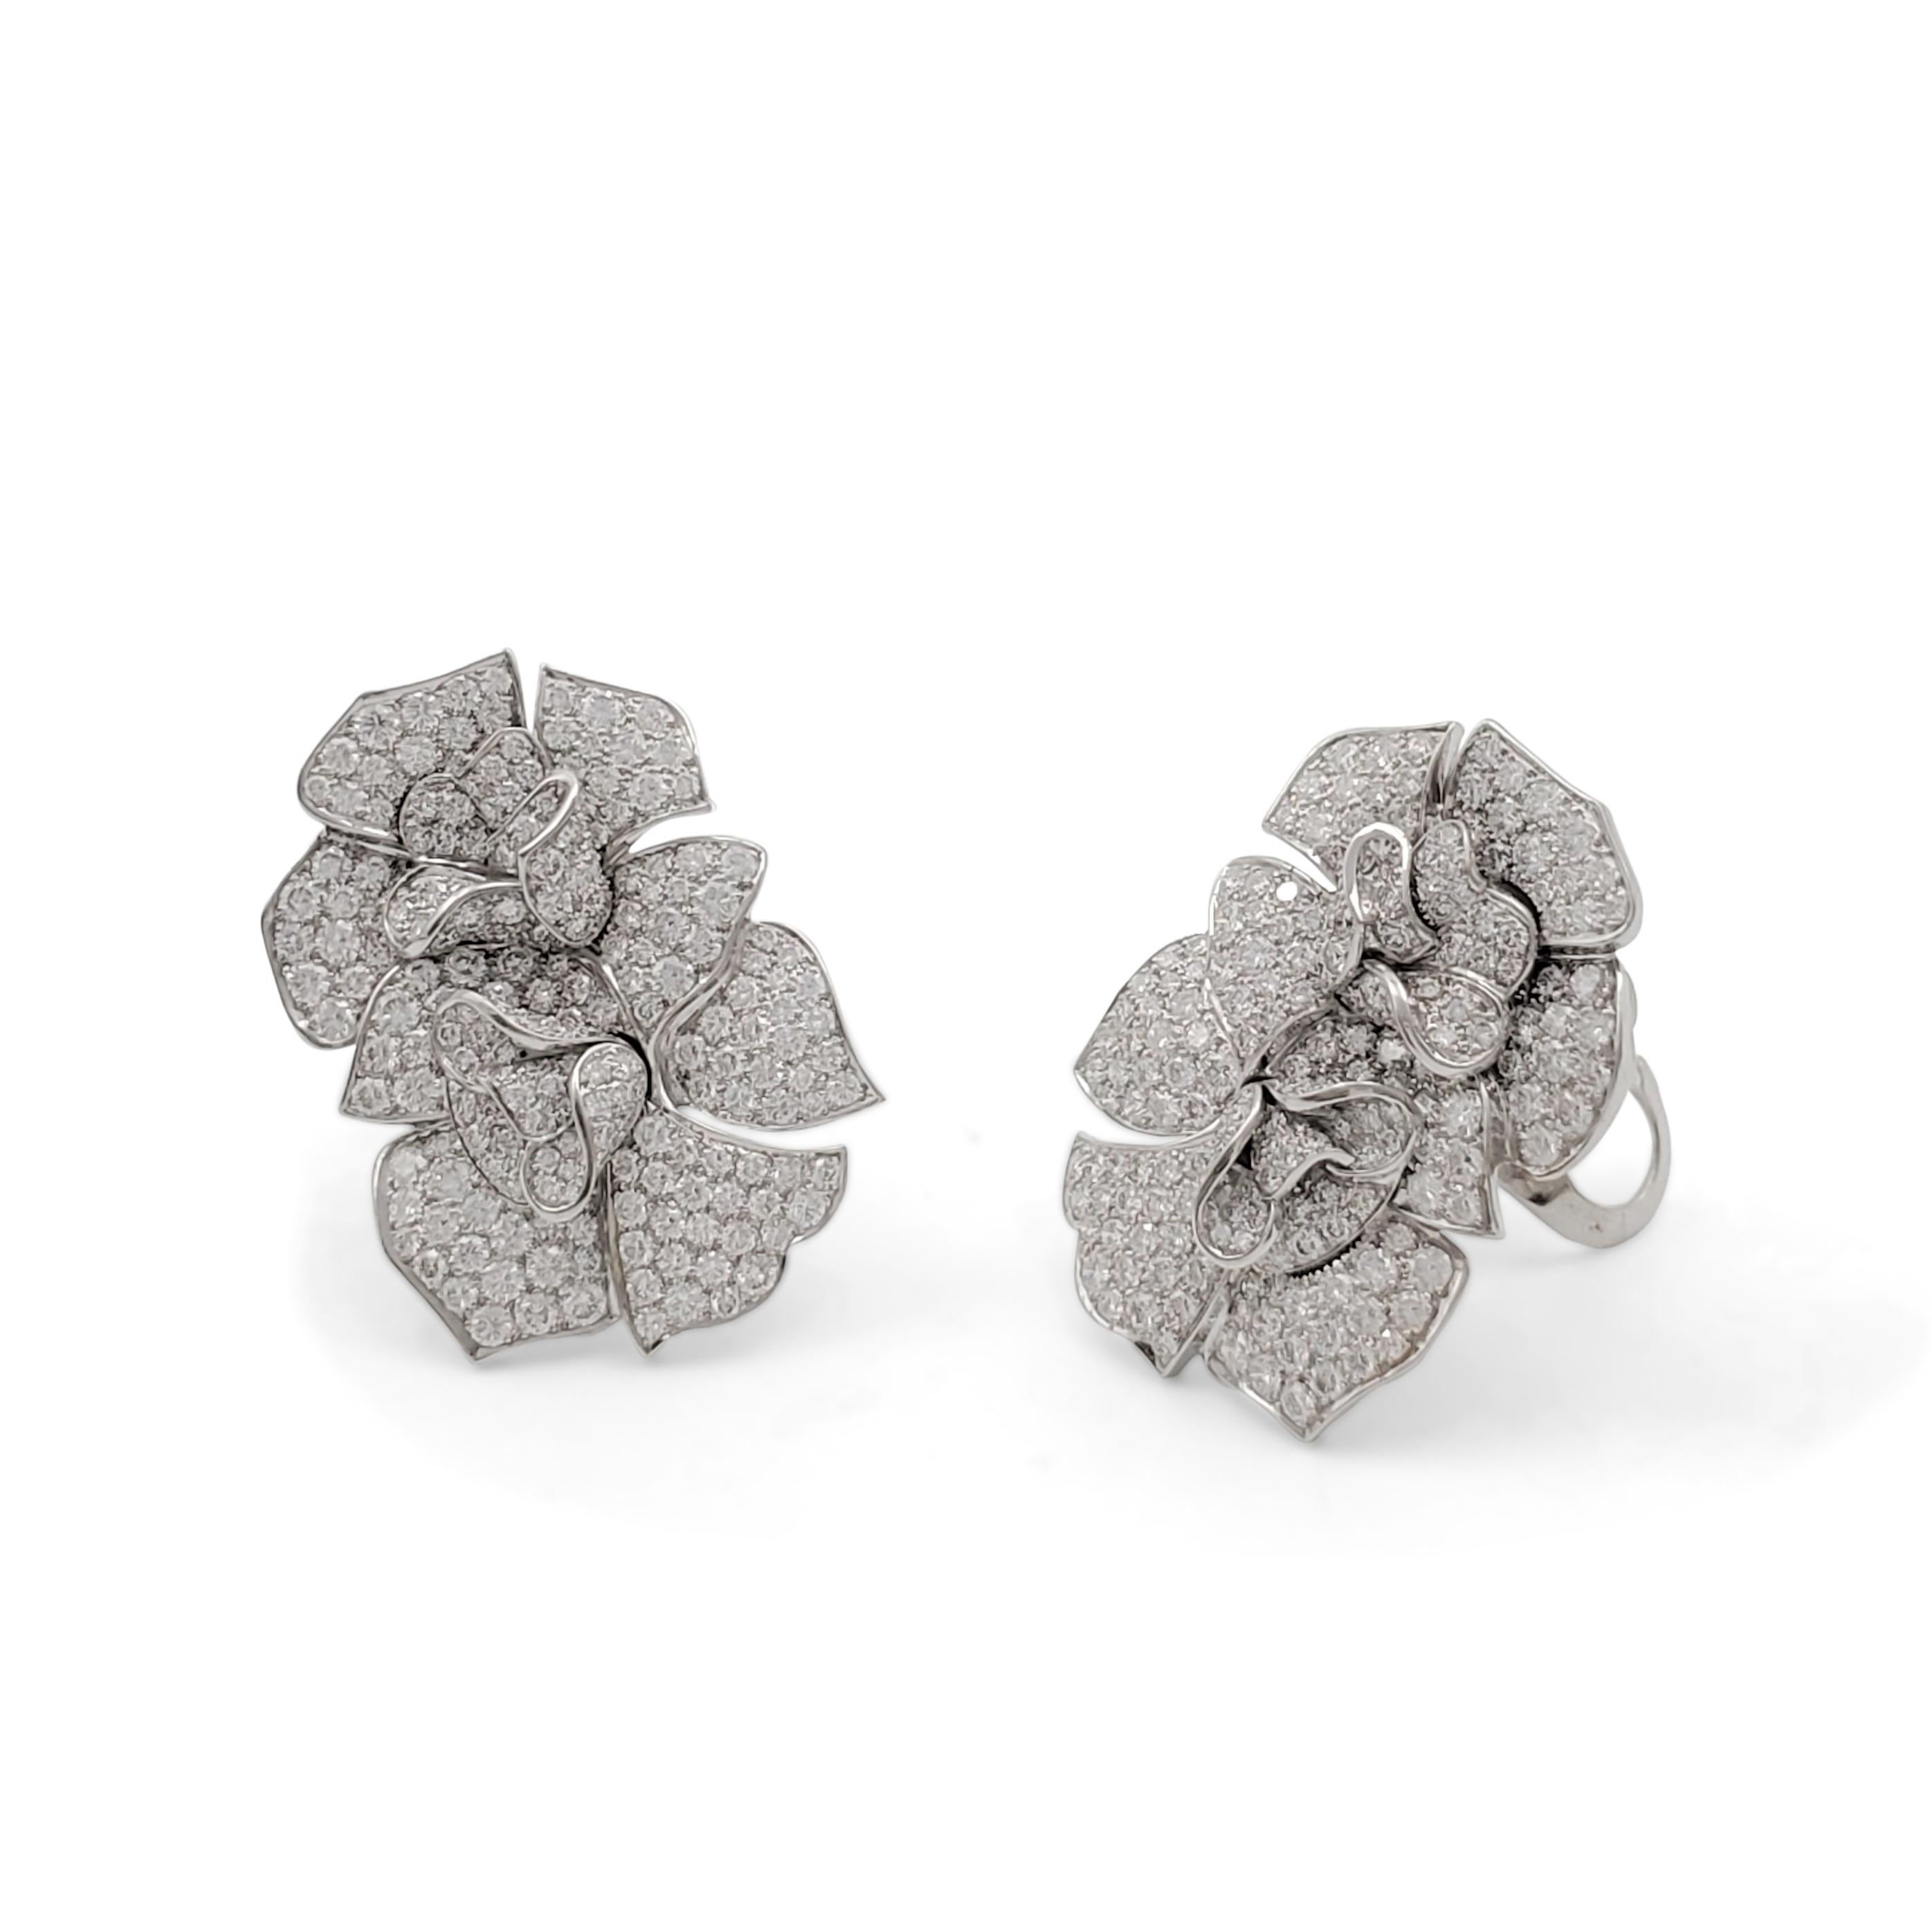 Round Cut Van Cleef & Arpels White Gold and Diamond Earrings